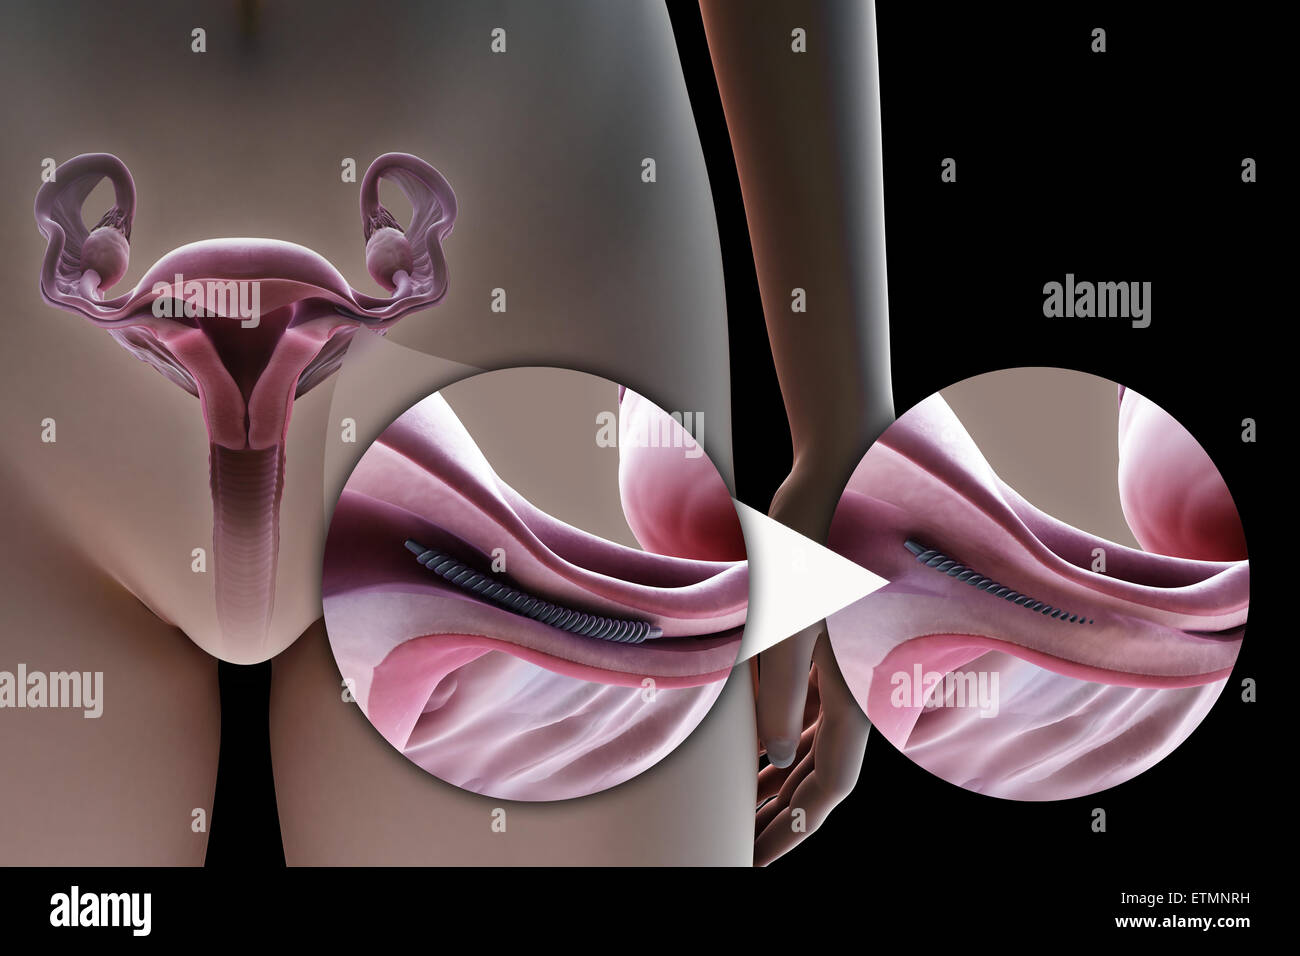 Illustration showing tubal ligation of the Fallopian tube by method of a metal implant, used to block the tube by the growth of scar tissue and prevent fertilization. Stock Photo